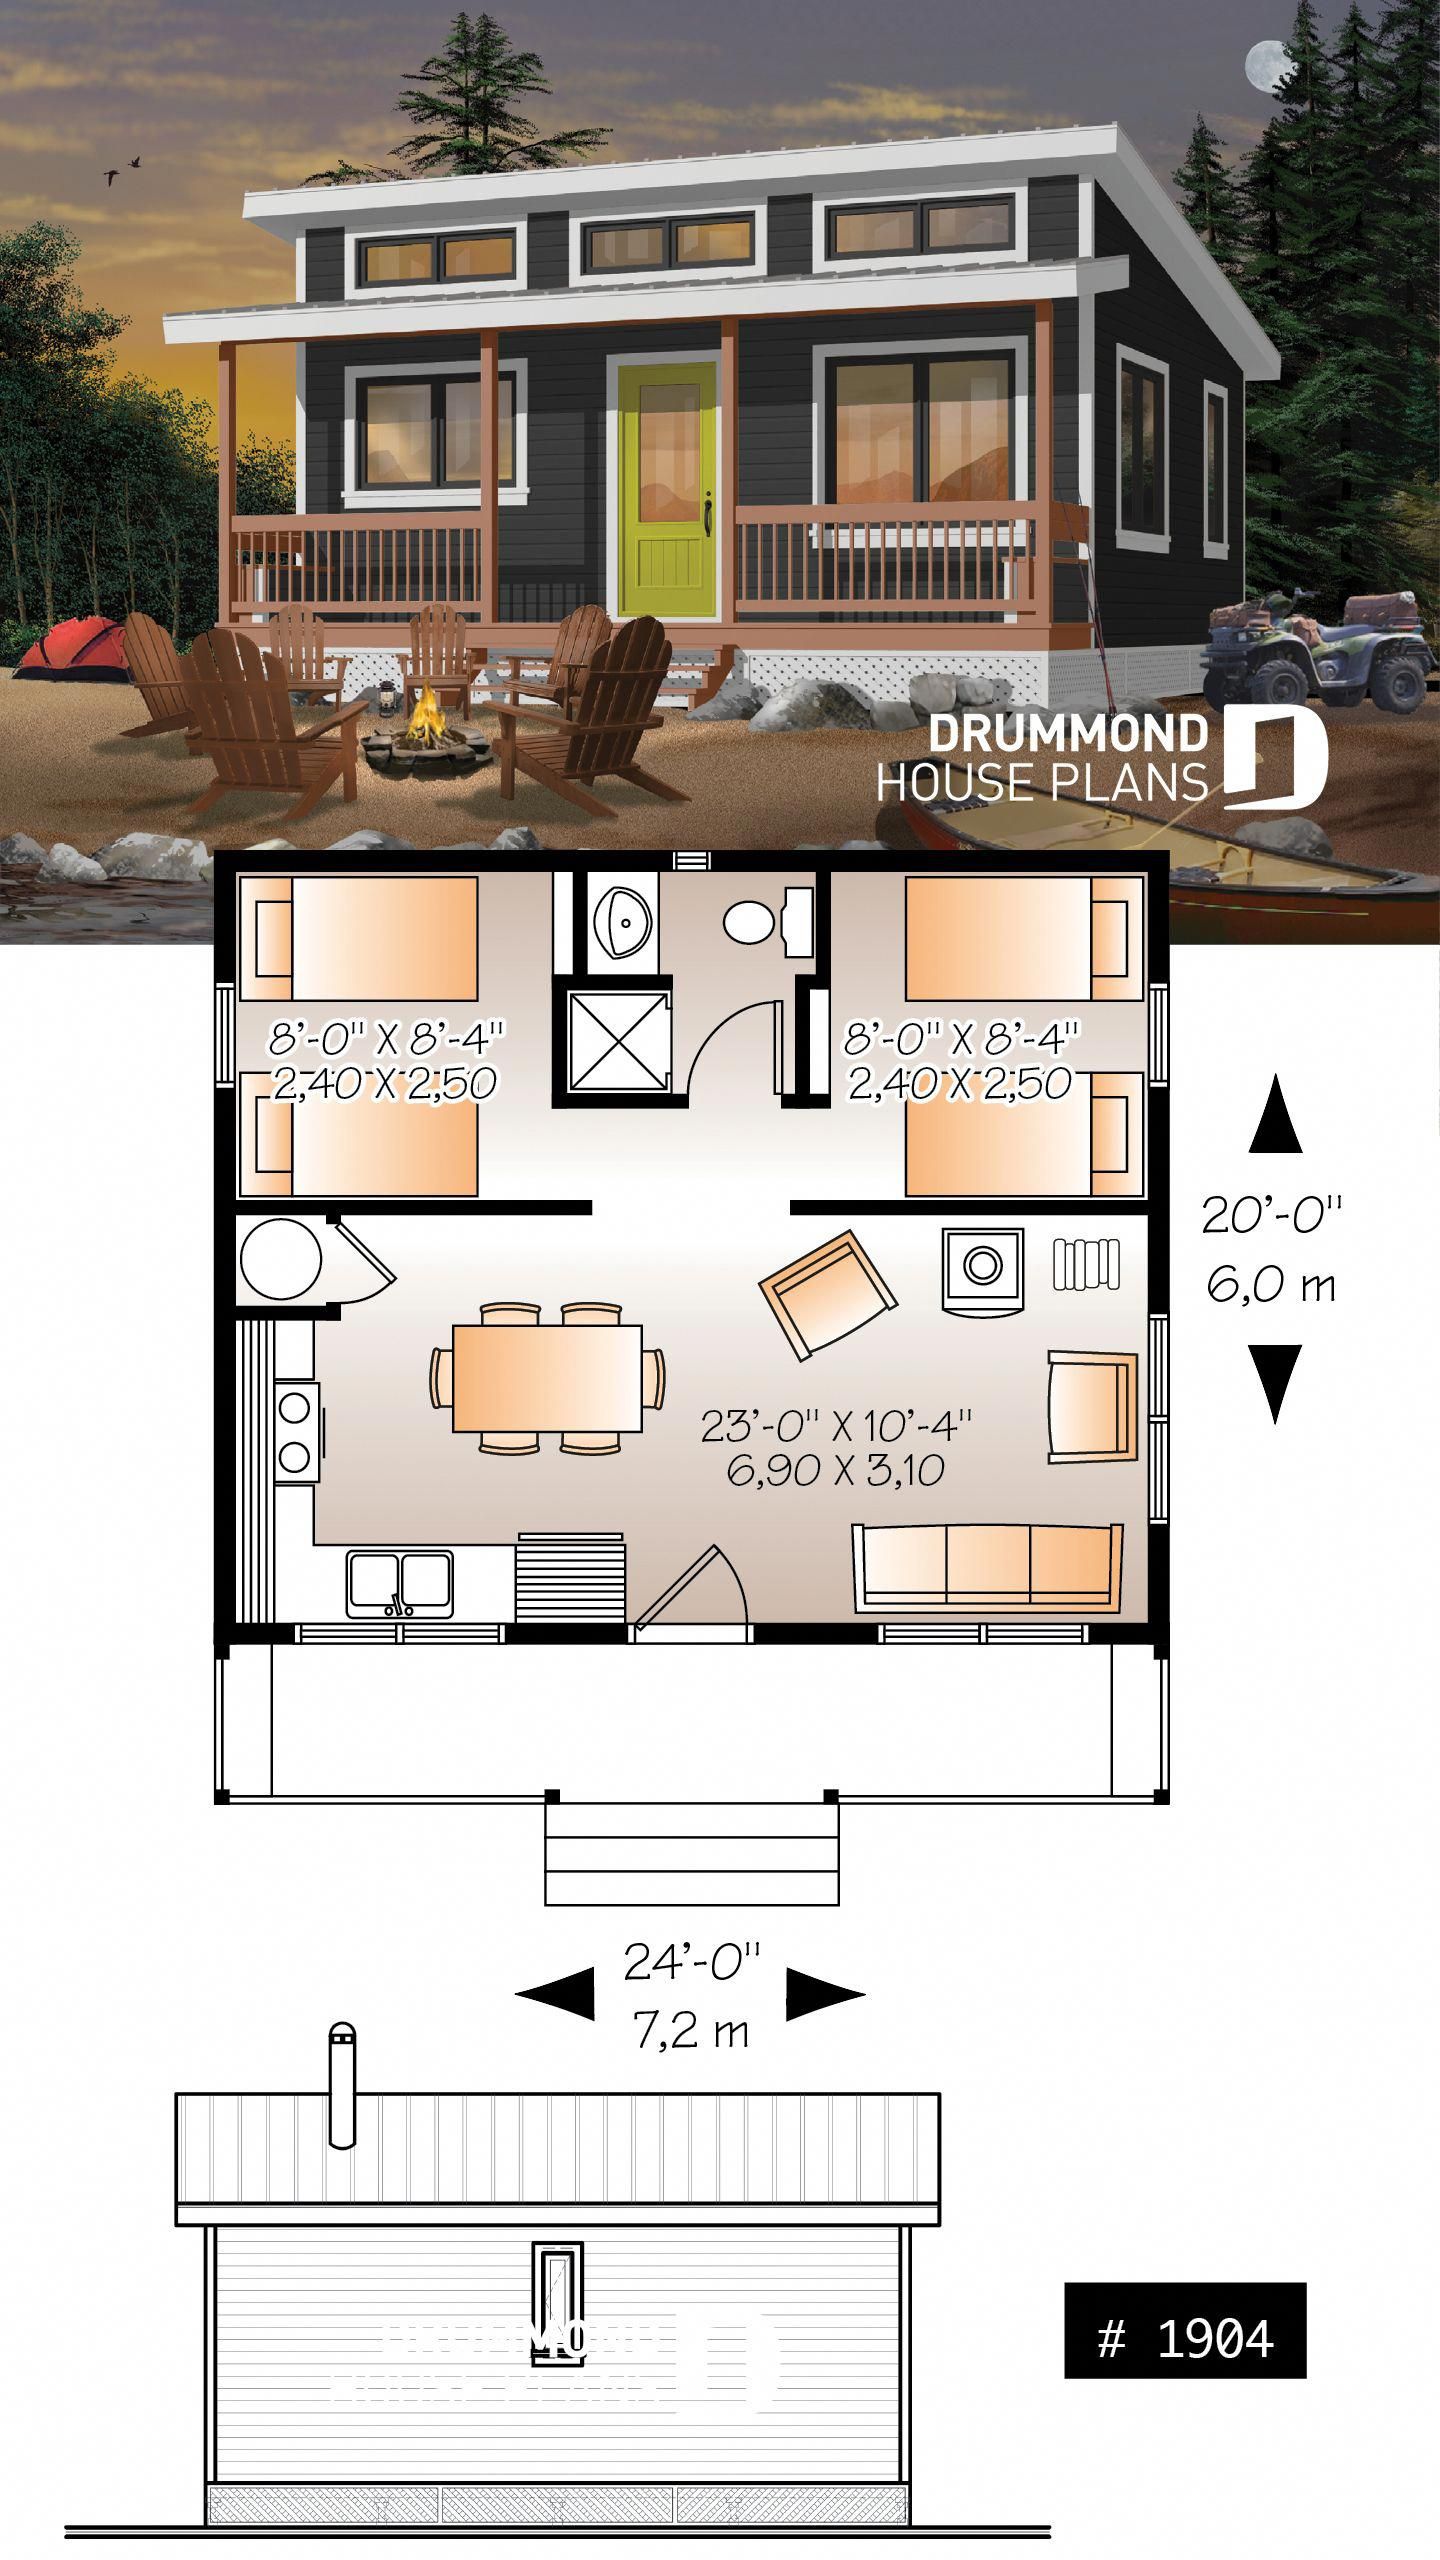 Affordable small 2 bedroom cabin plan, wood stove, open